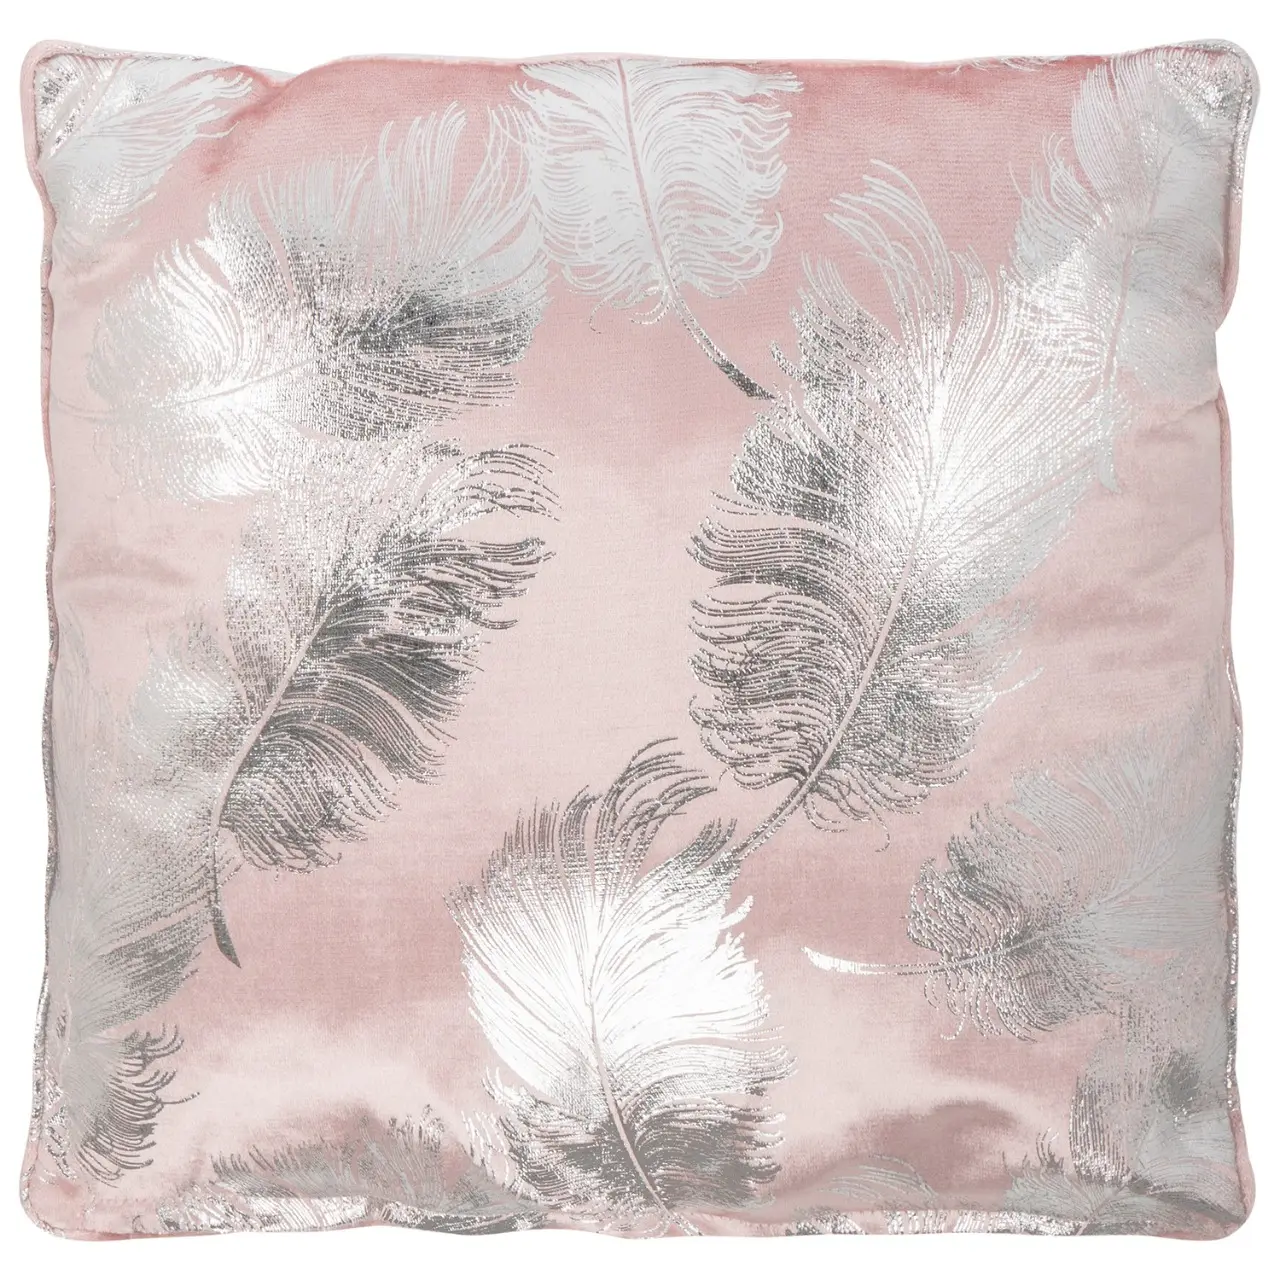 Standard New Design Decoration Cushion Soft Fancy New Light Pink Color Rectangle Shape Hotel and Cafe Cushion At Lowest Price